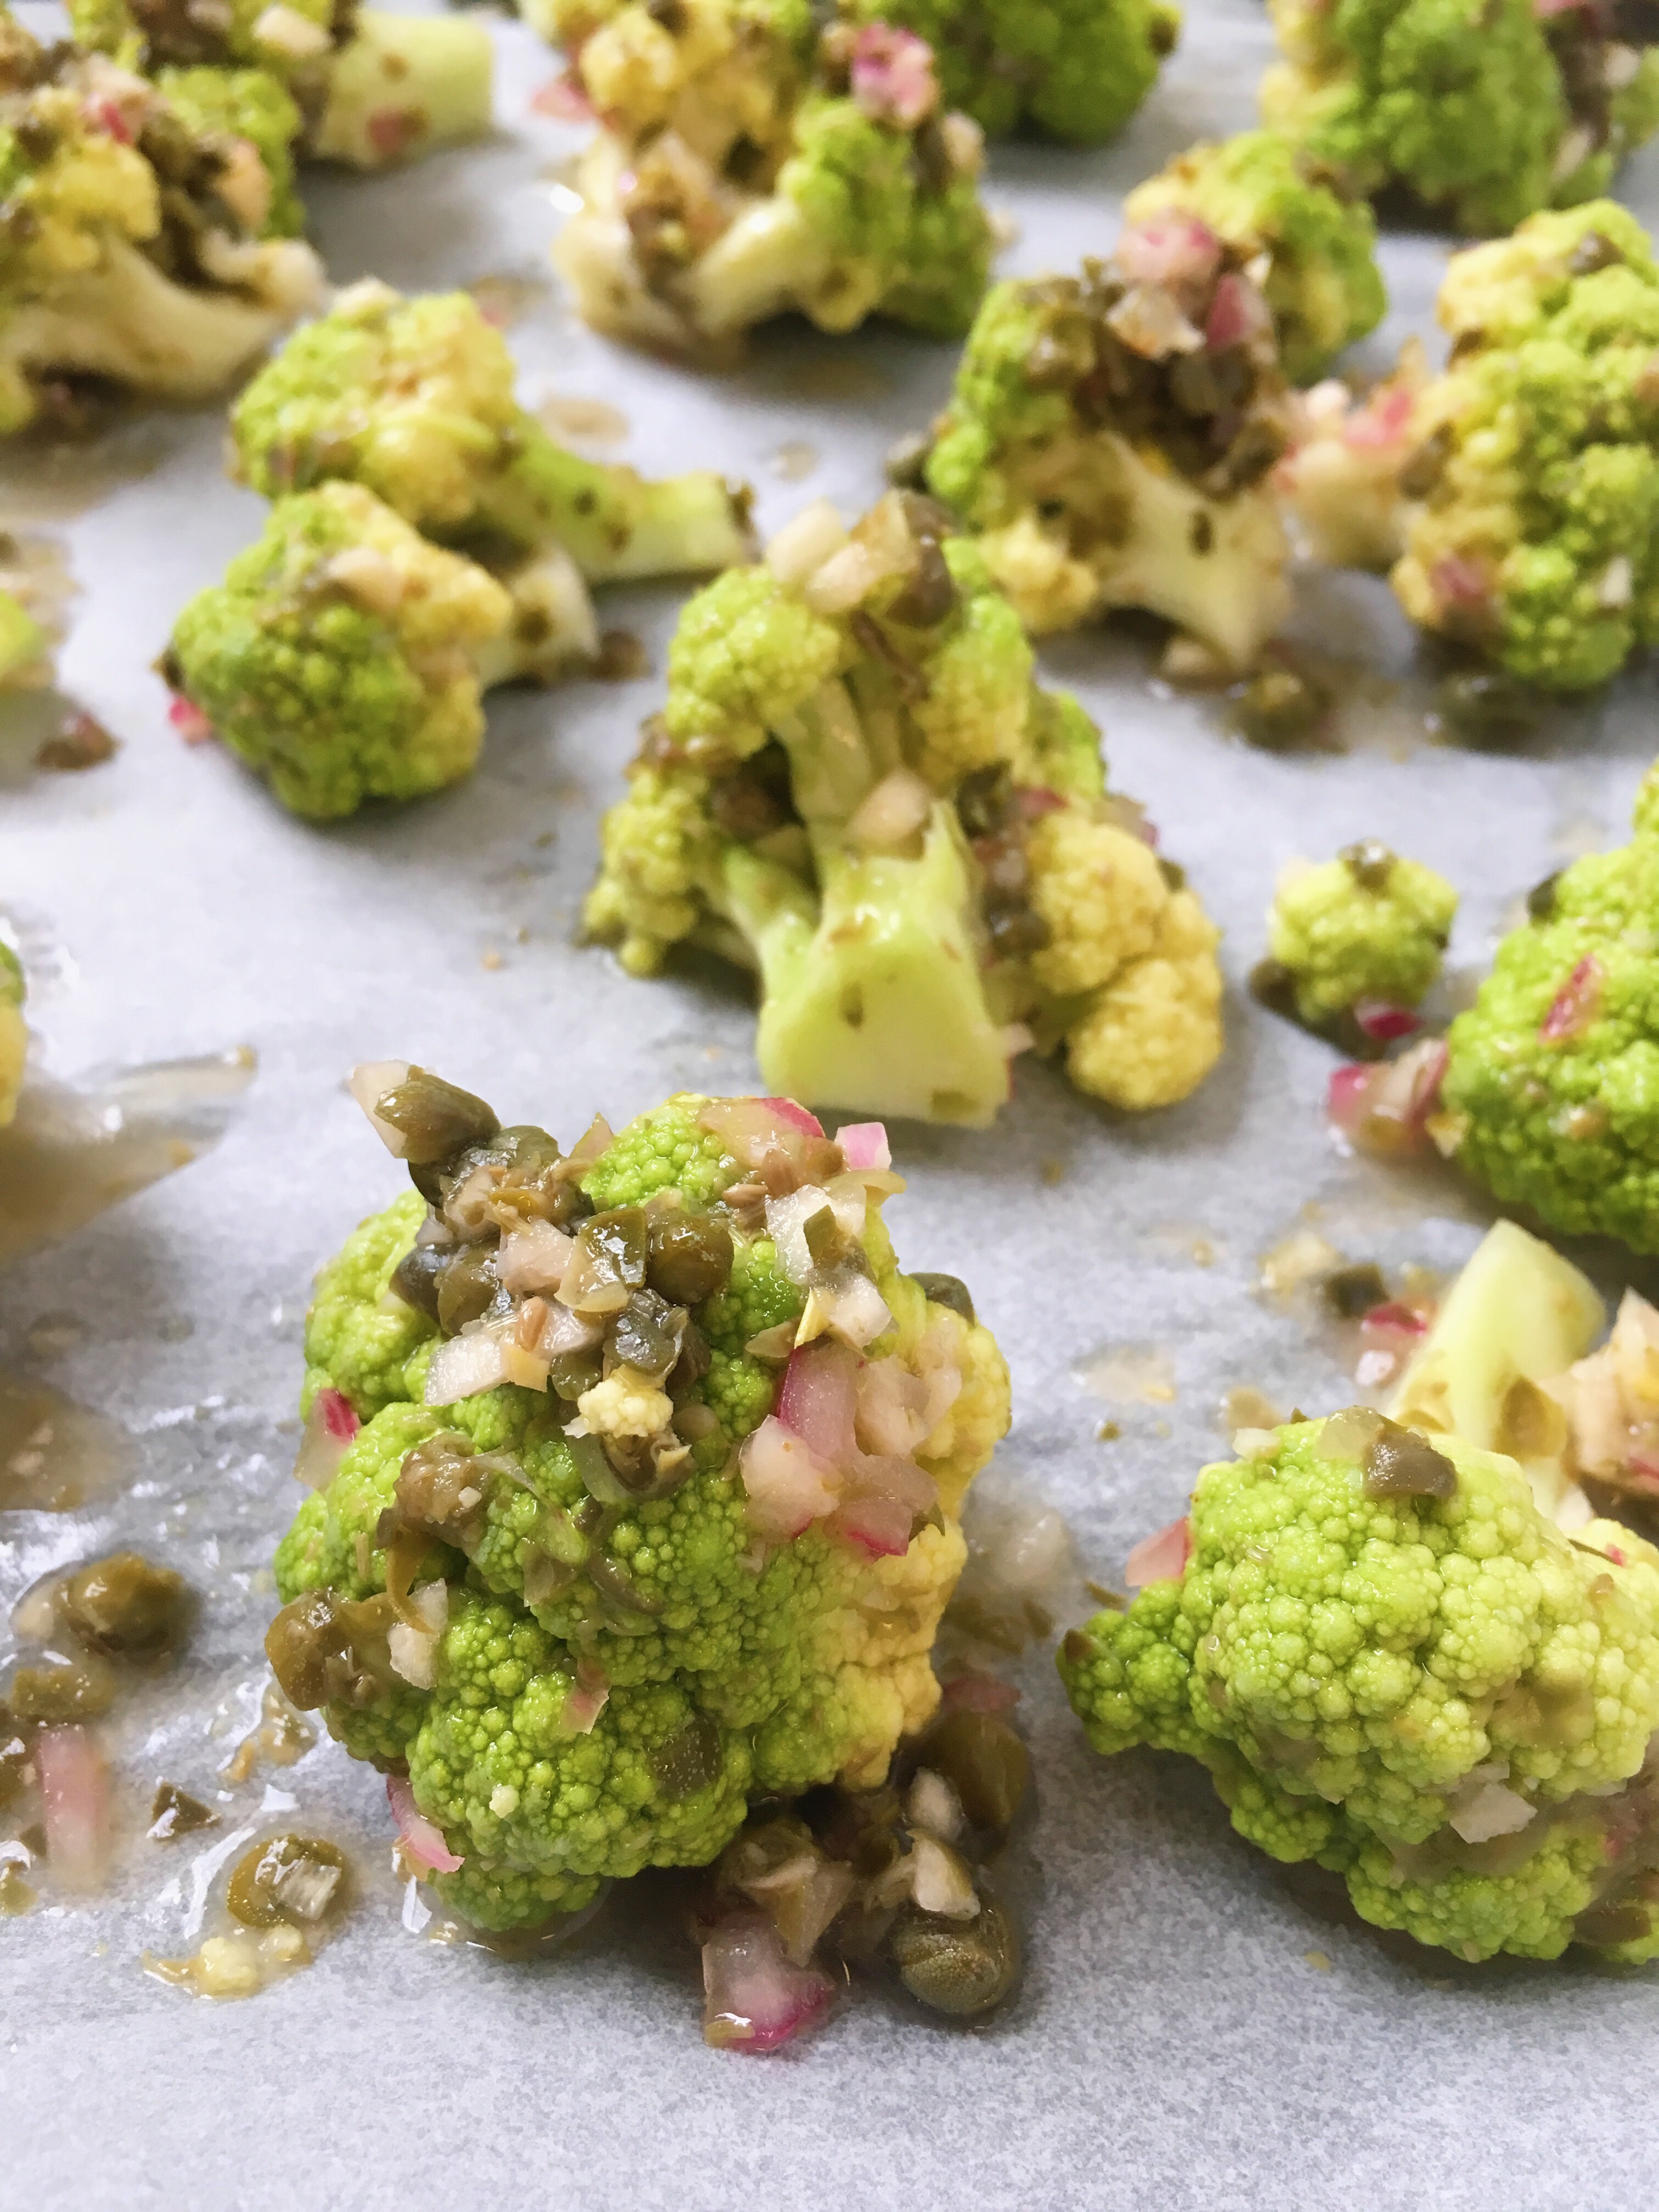 Green cauliflower with capers and seasoning